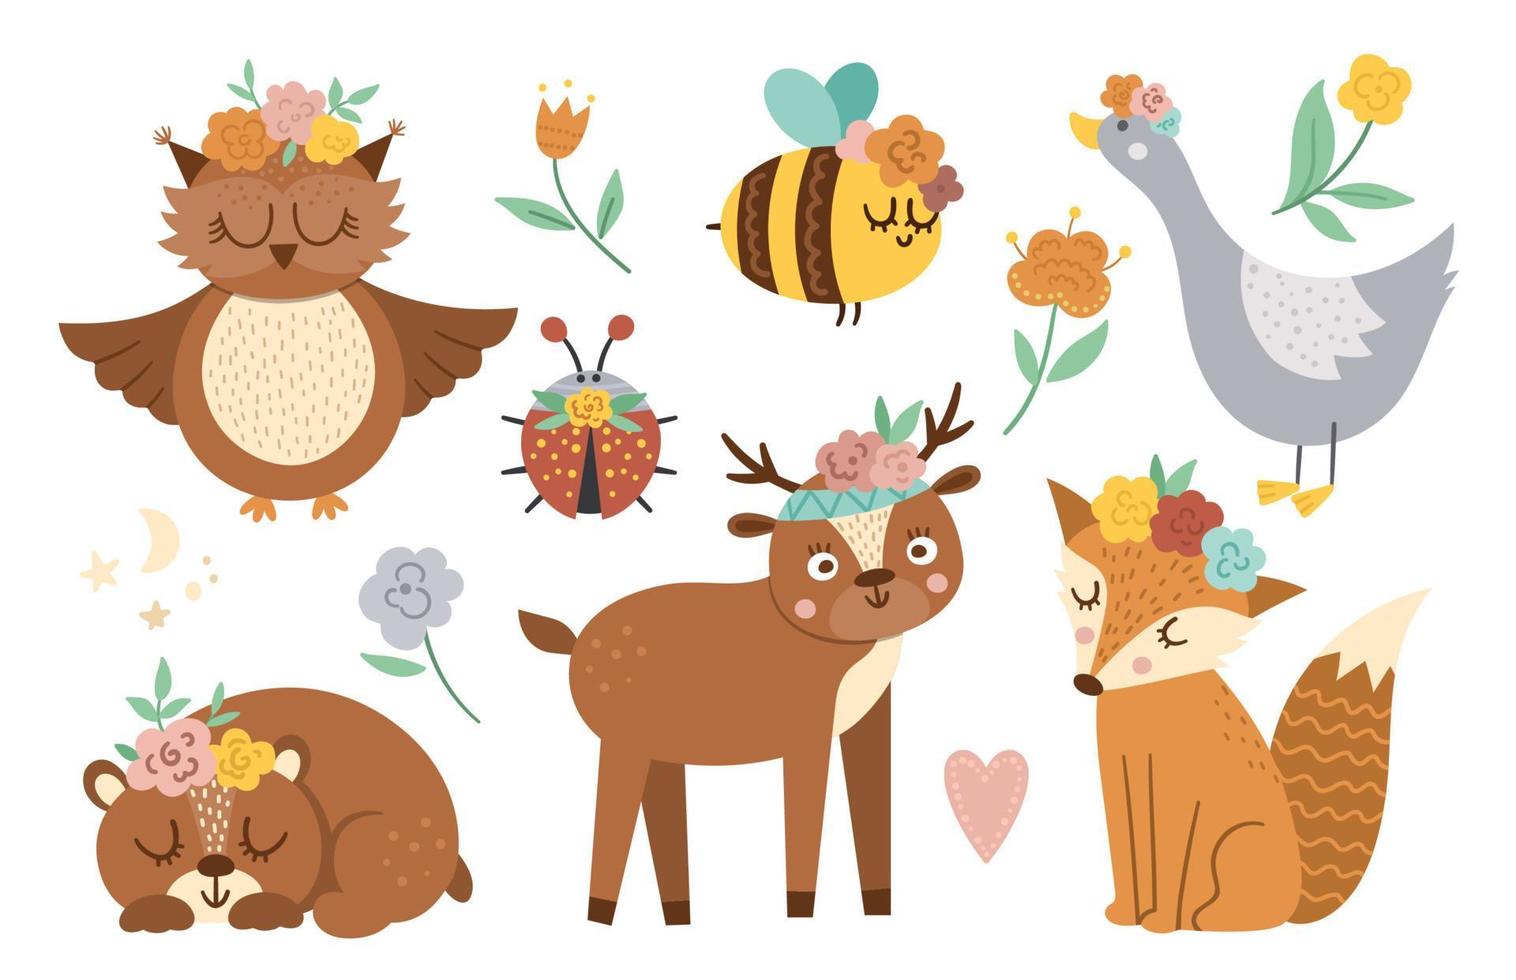 Vector woodland animals, insects and birds collection. Boho forest set. Bohemian fox, owl, bear, deer, ladybug, goose with flowers on heads. Celestial clip art pack with cute characters.